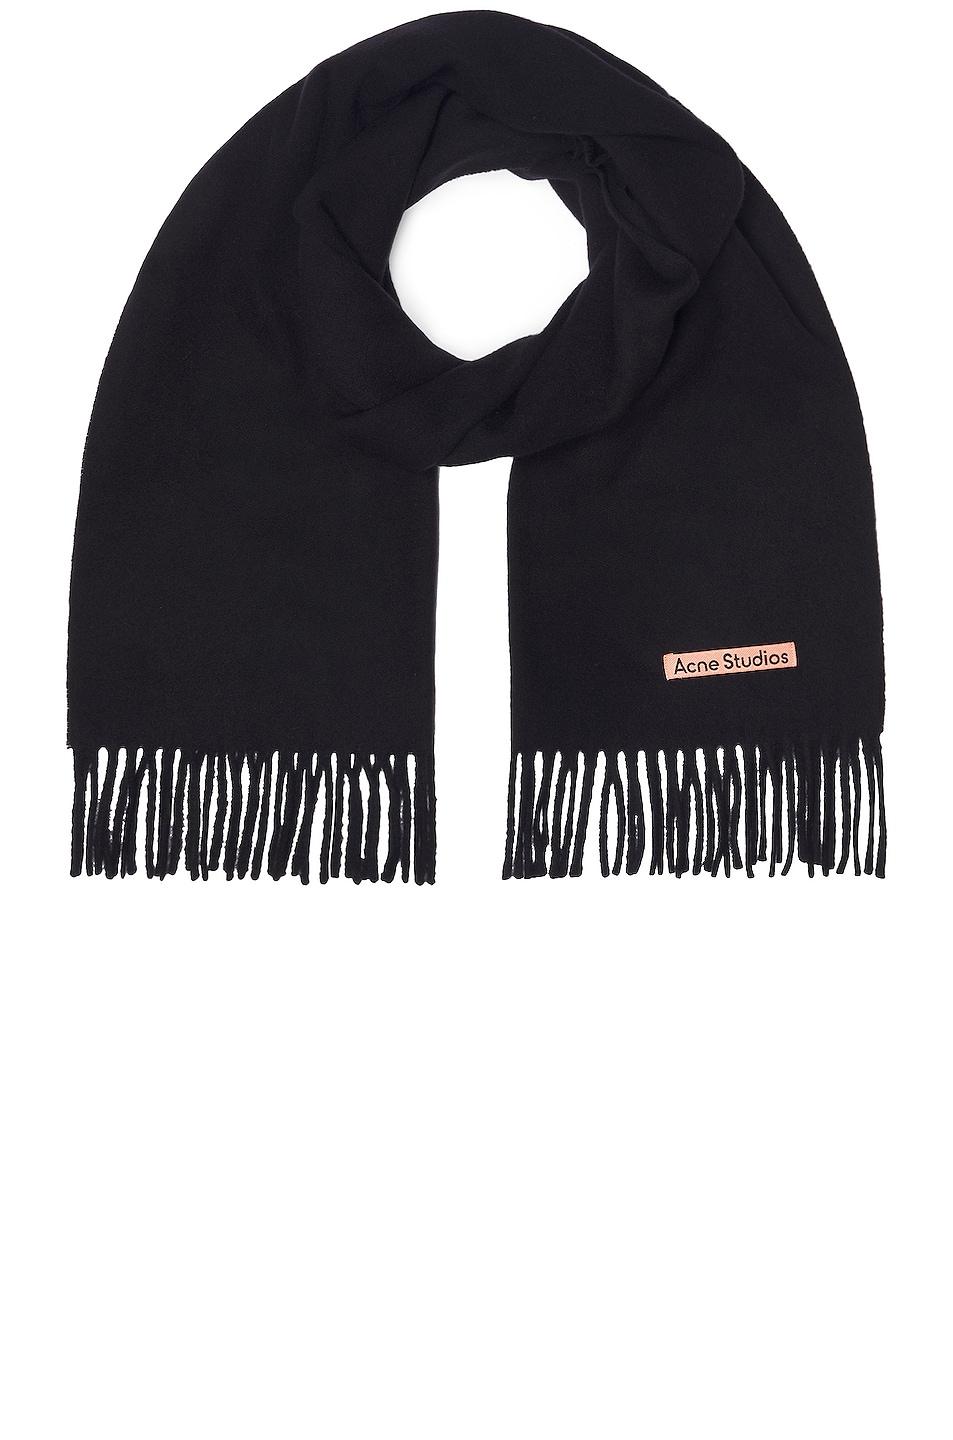 Acne Studios Wool Canada New Scarf in Chocolate Brown Melange for Men Mens Accessories Scarves and mufflers Brown 